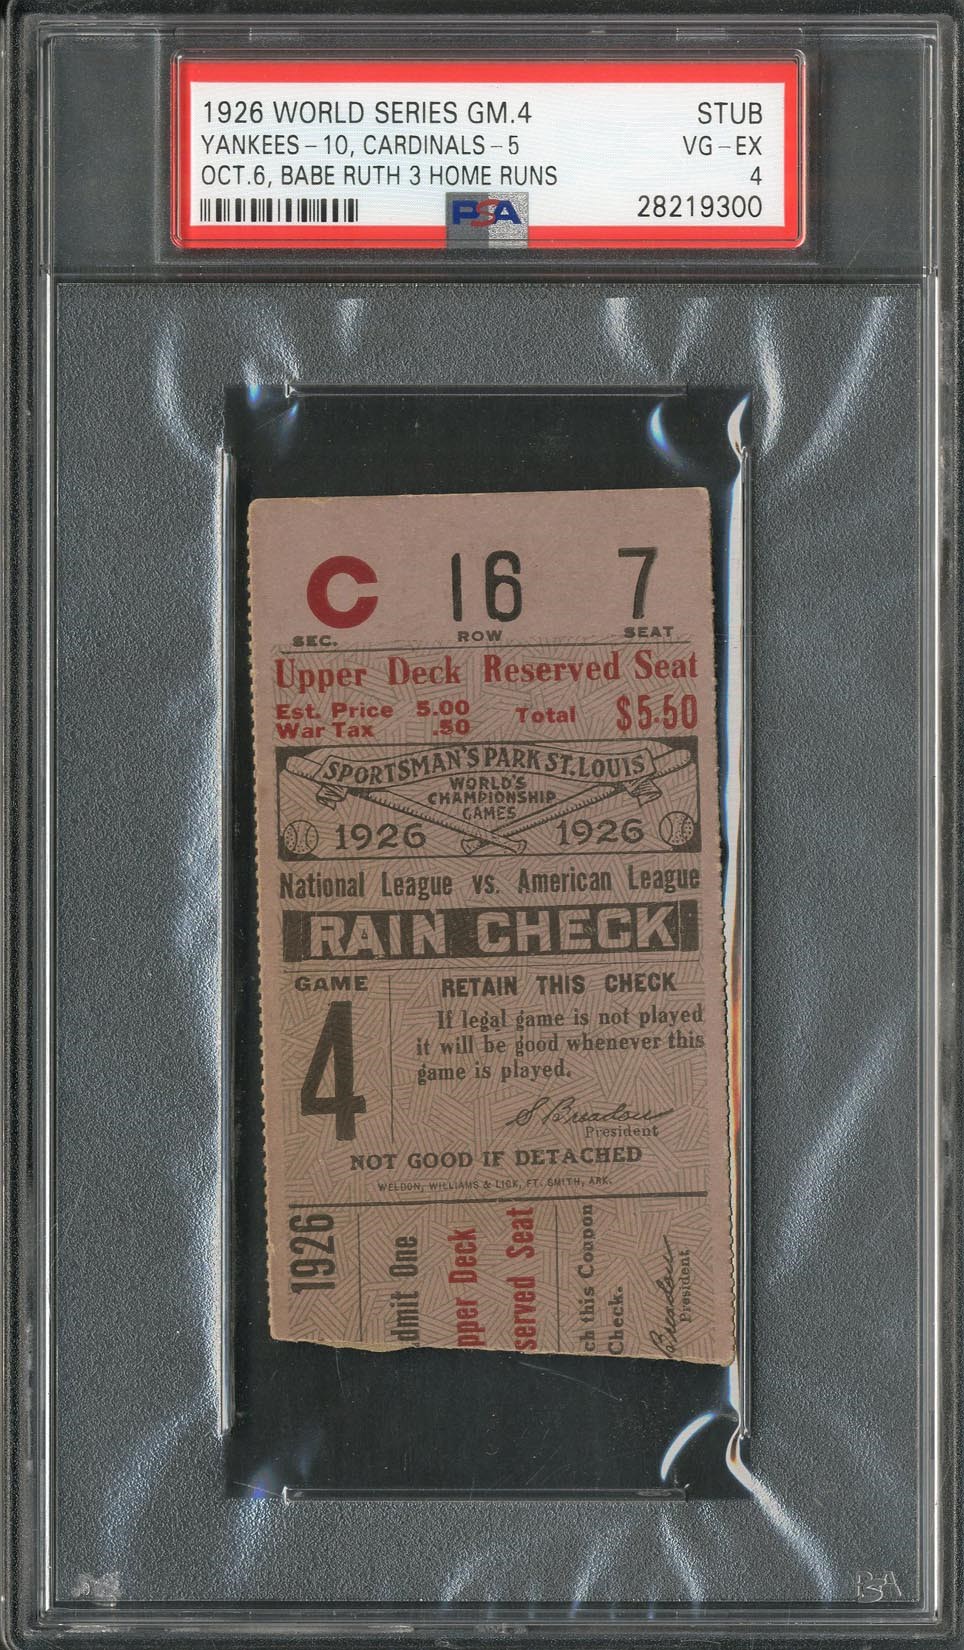 Ruth and Gehrig - 1926 World Series Ticket Stub from Ruth 3 Home Run Game (PSA)